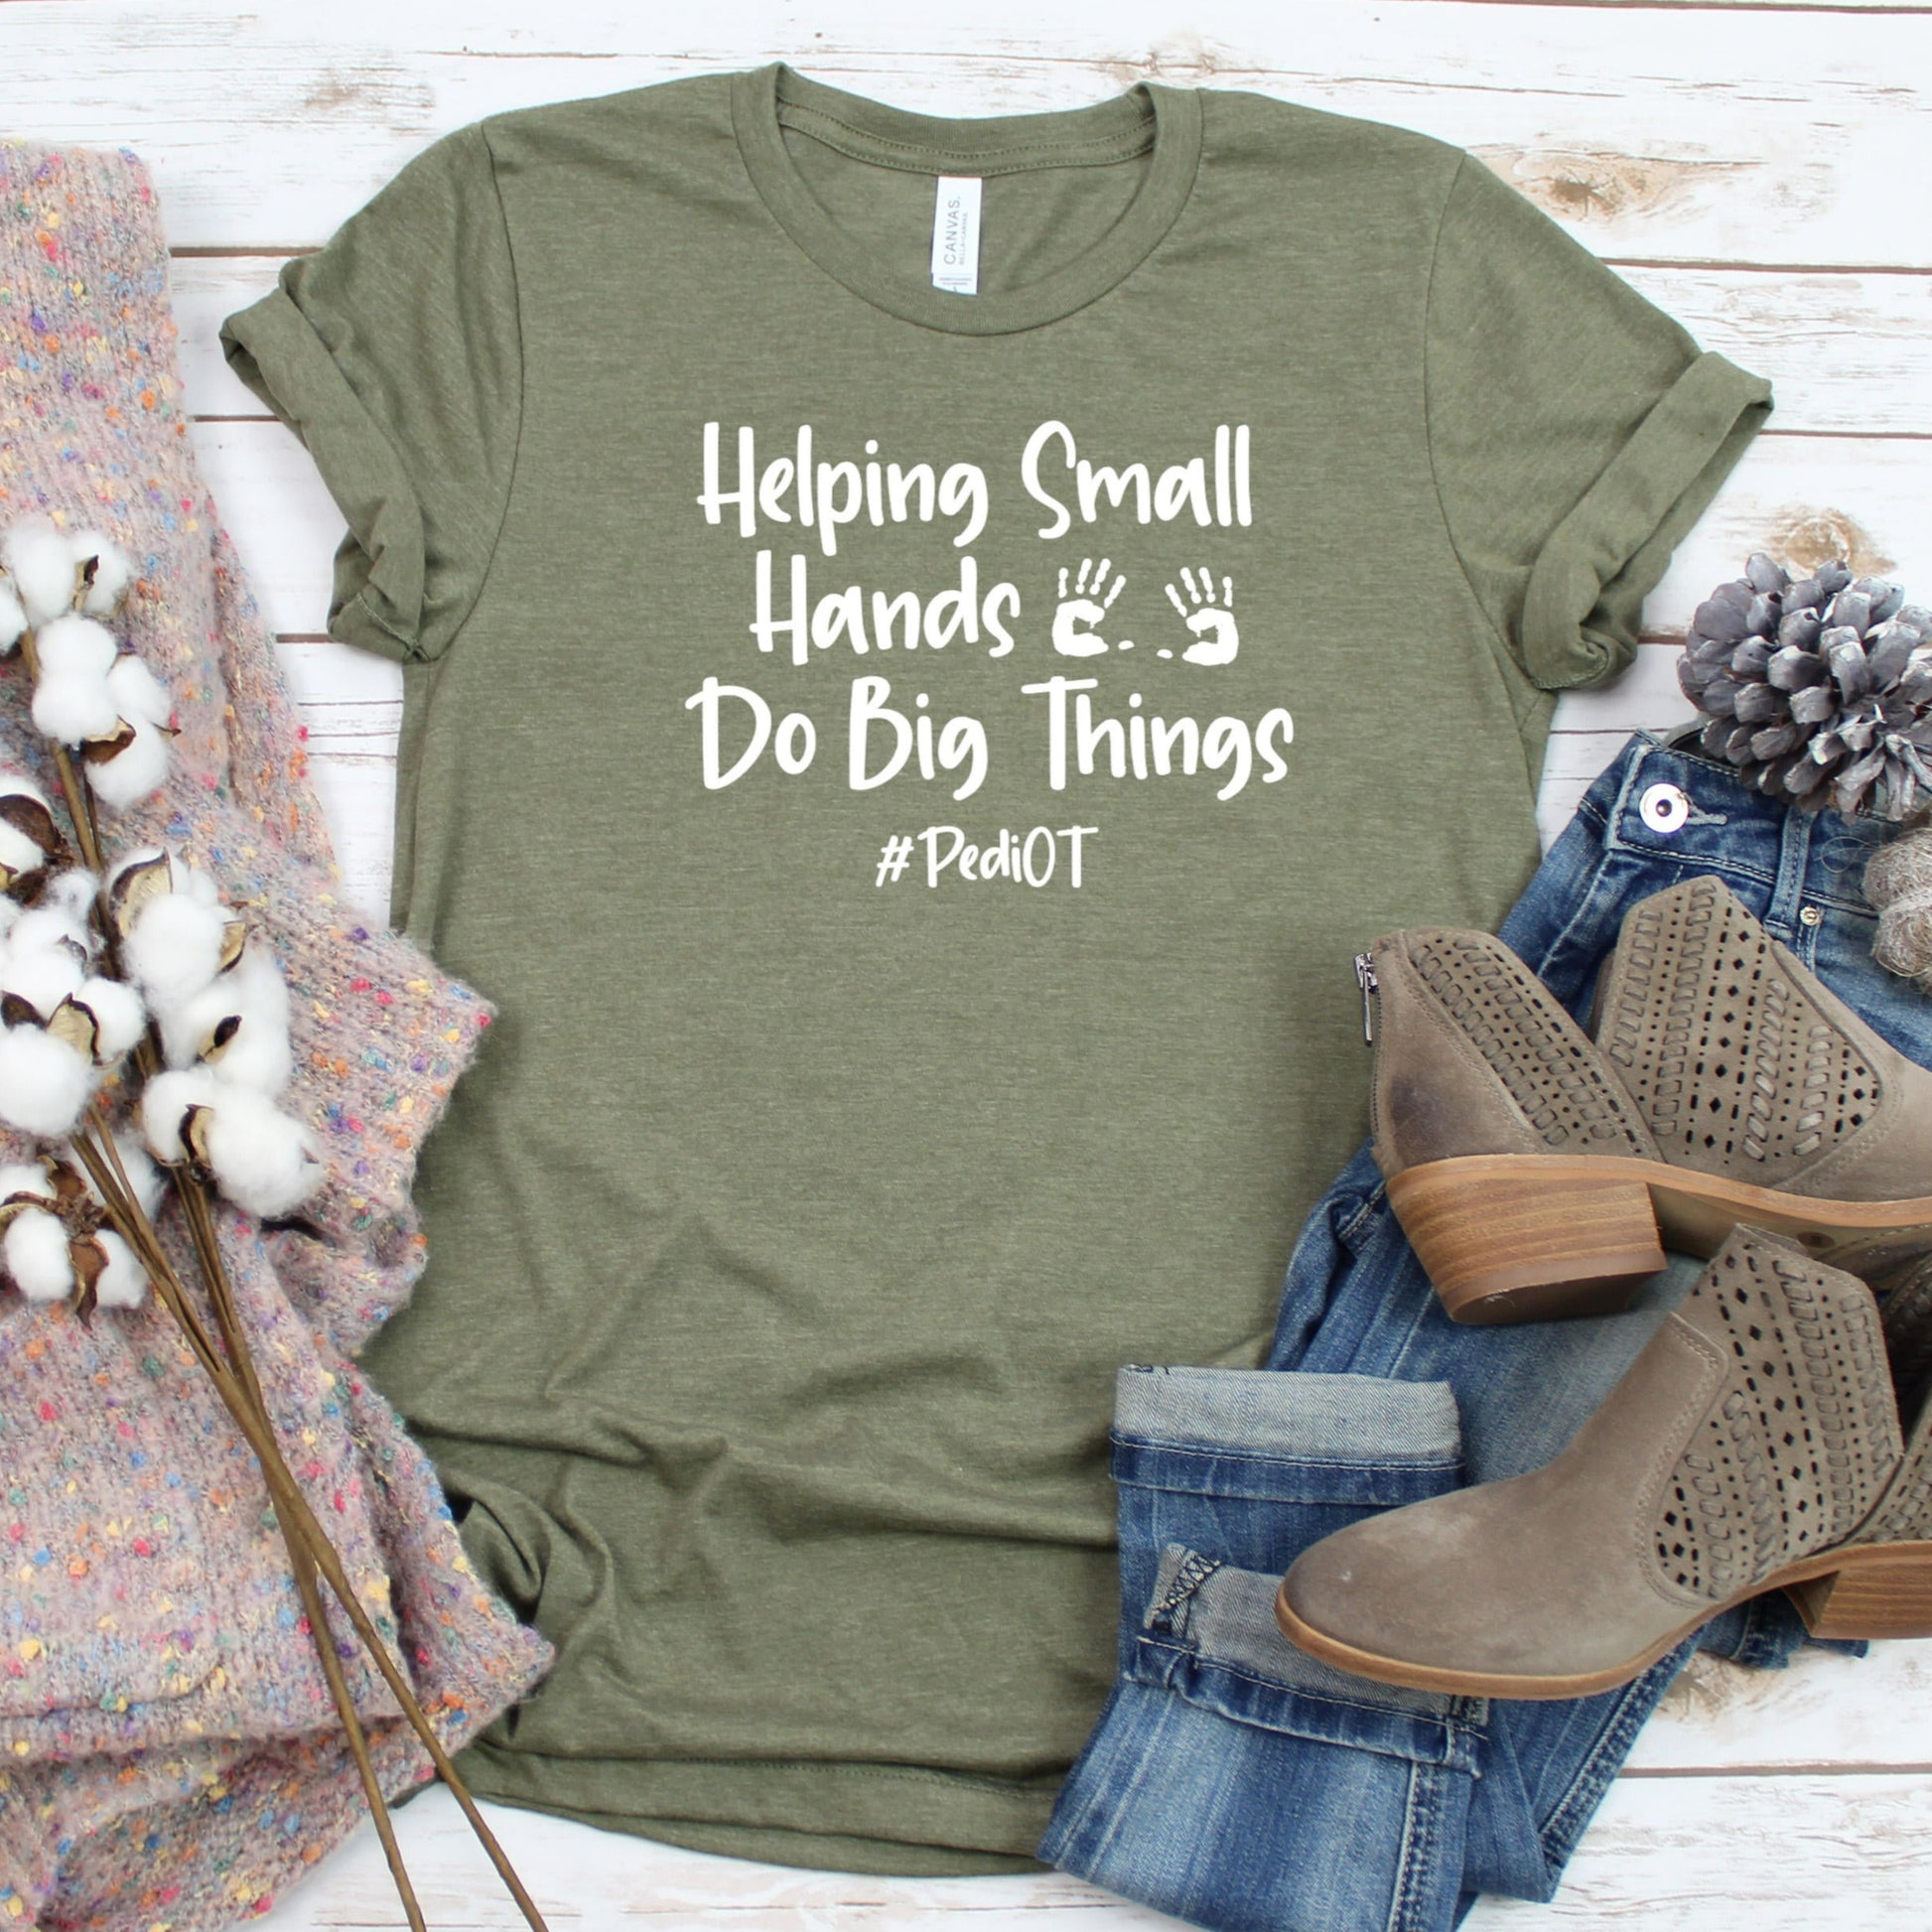 Occupational Therapy Shirt, Helping Small Hands Do Big Things, Pediatric OT, PediOT, Pediatric Occupational Therapy Shirt, #PediOT, OT Shirt